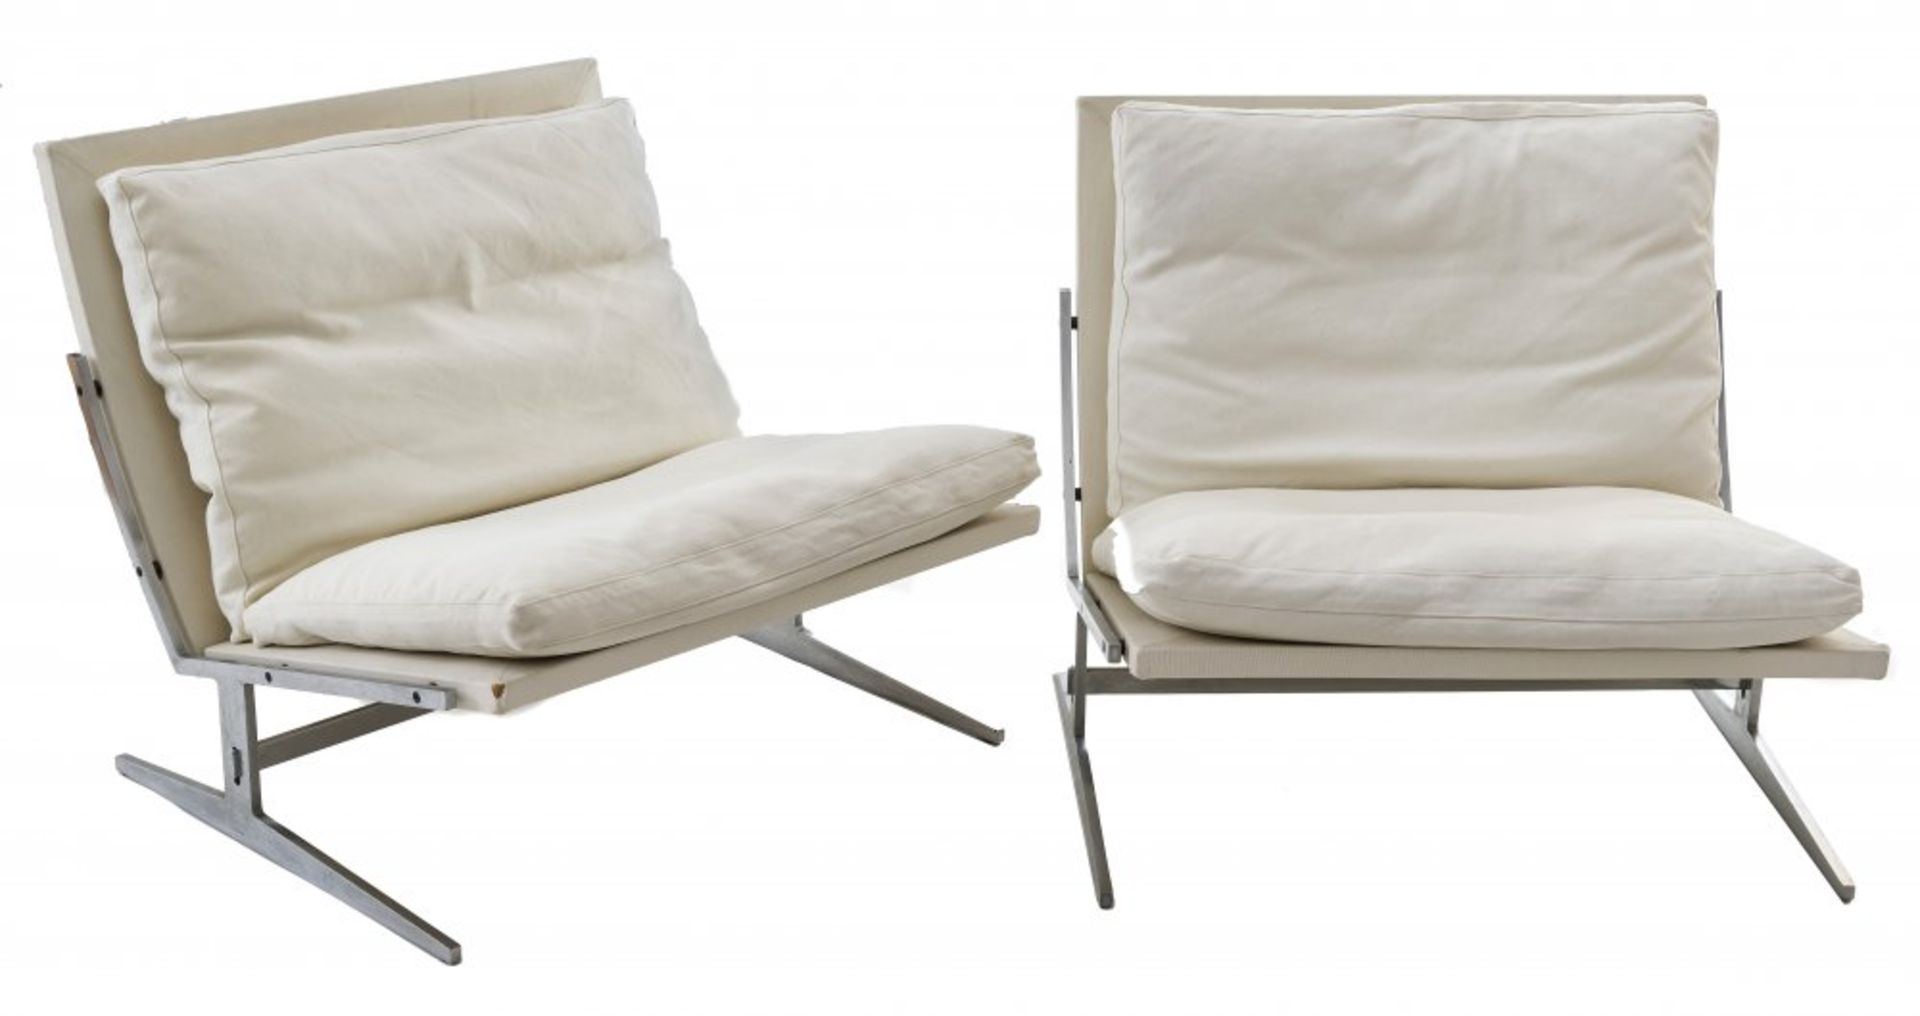 Two arm chairs